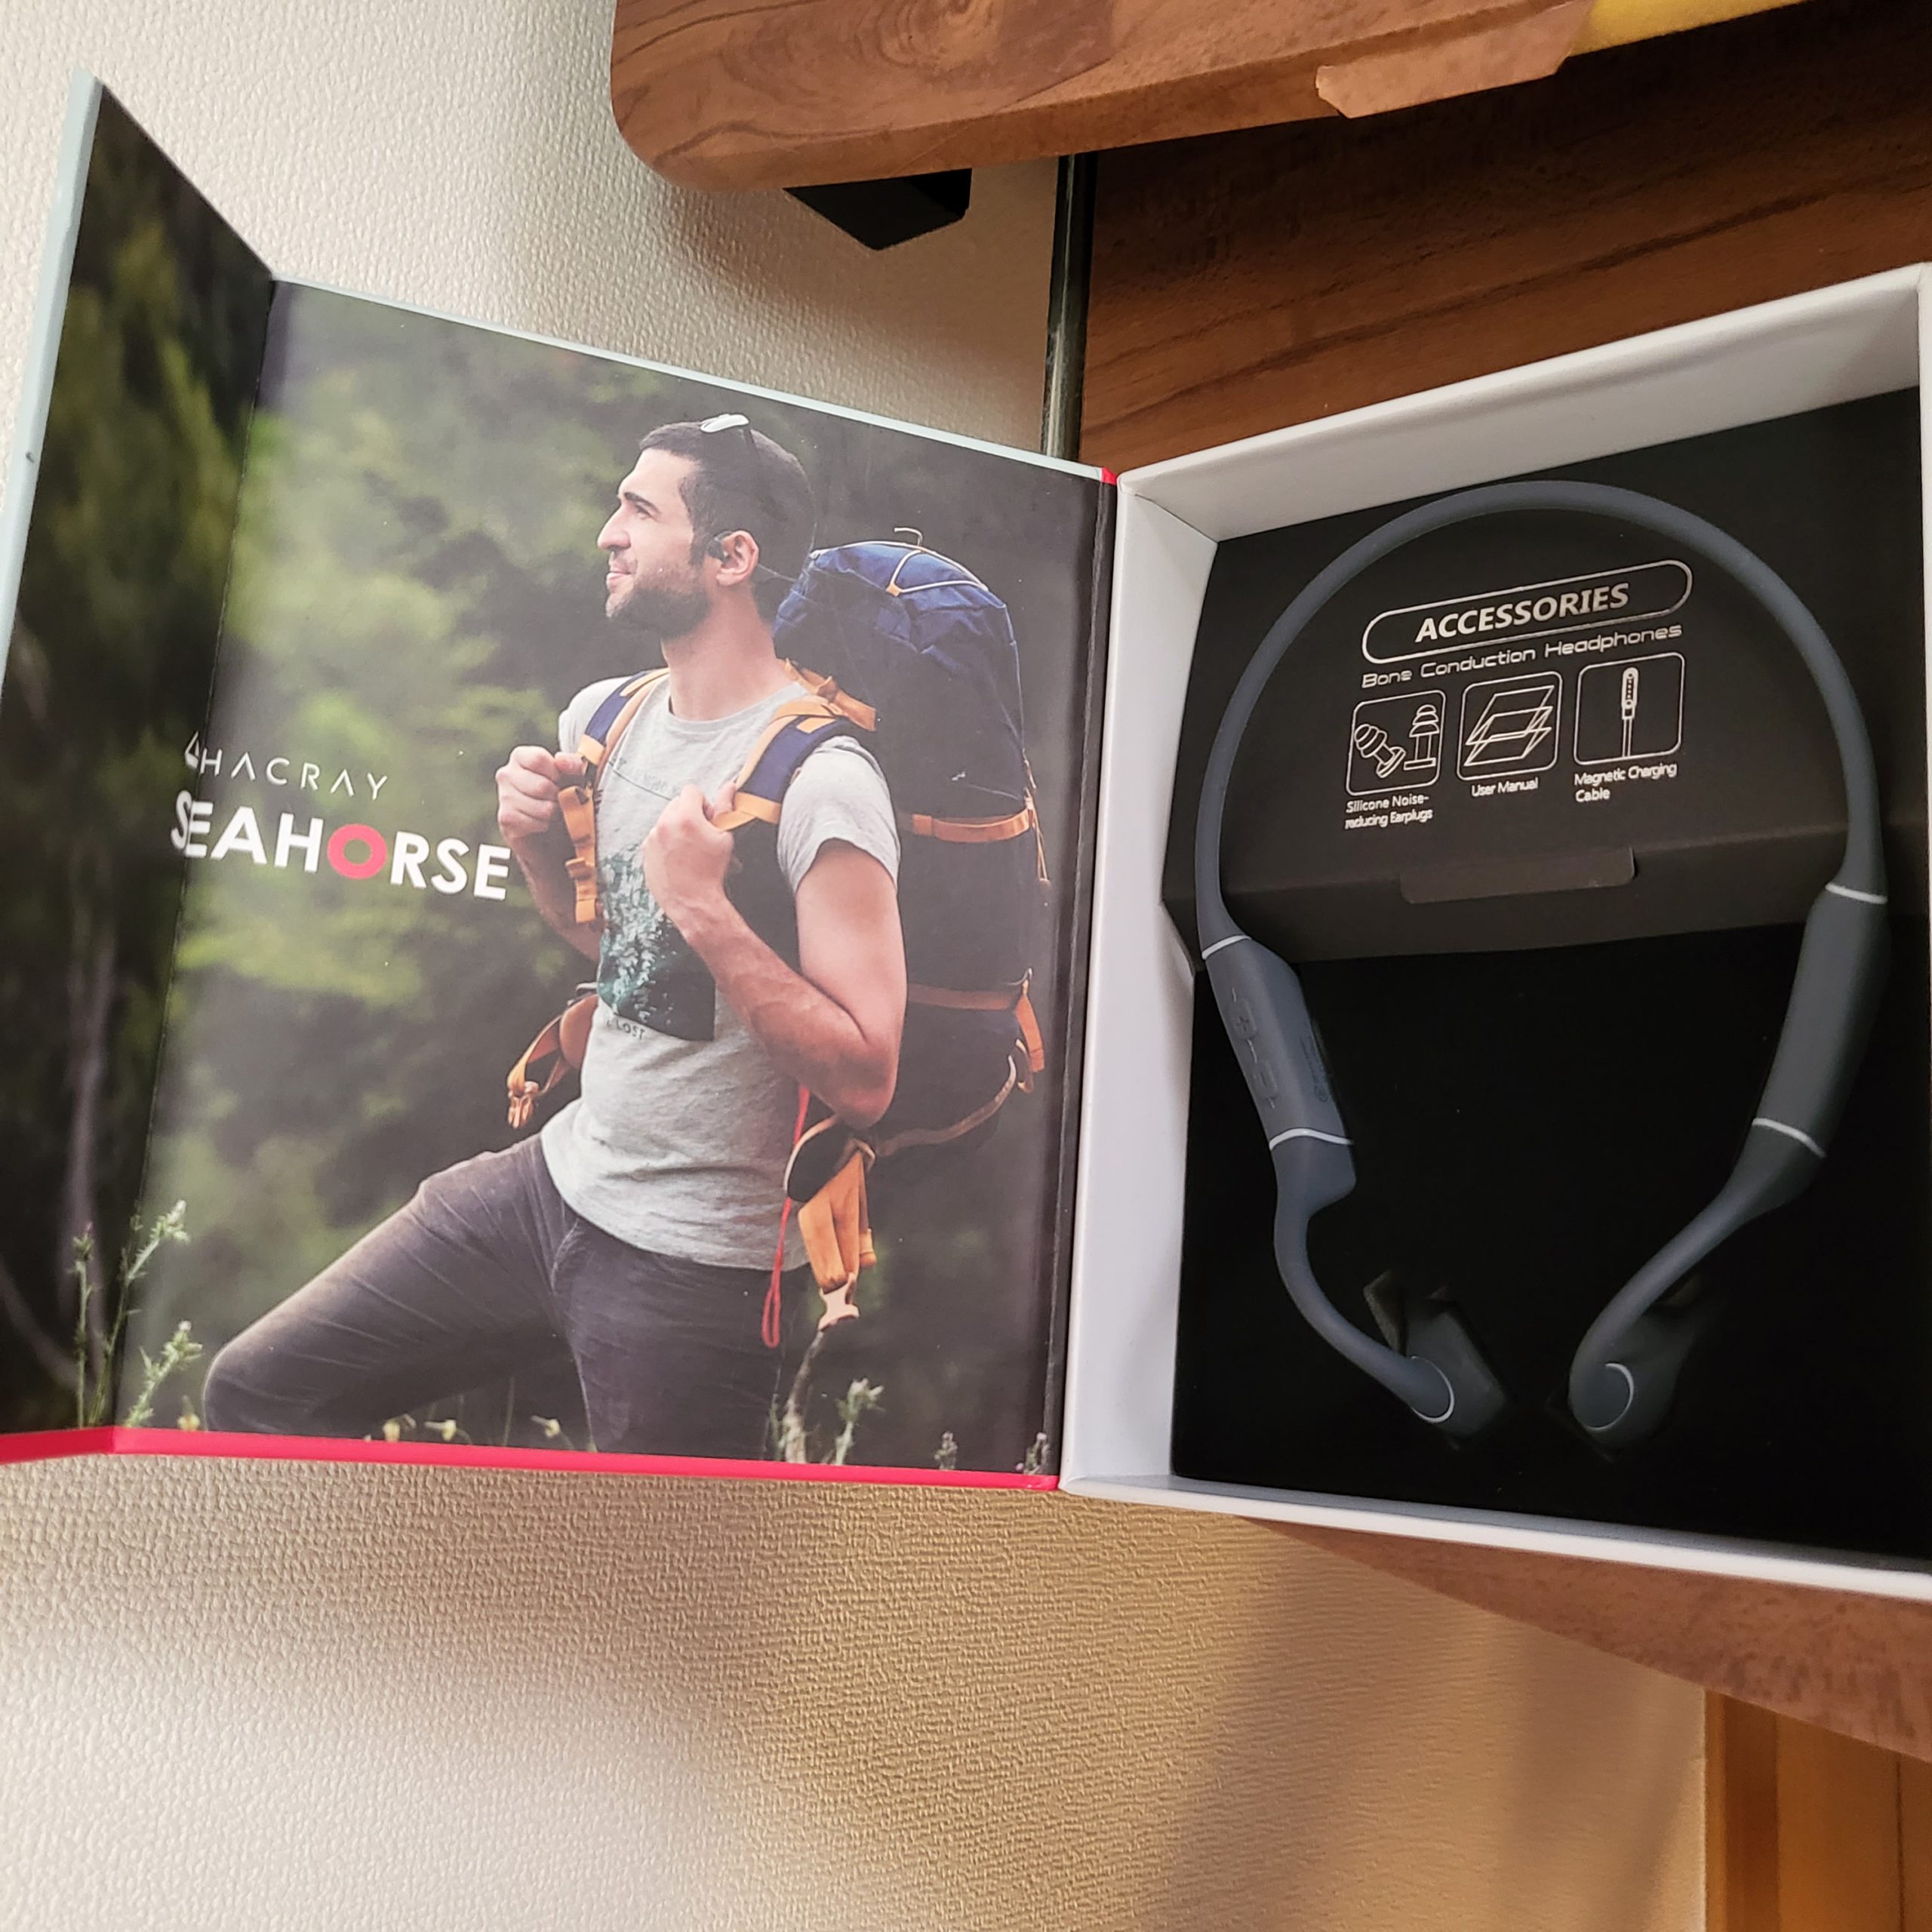 Review of SeaHorse, HACRAY bone conduction headphones | The